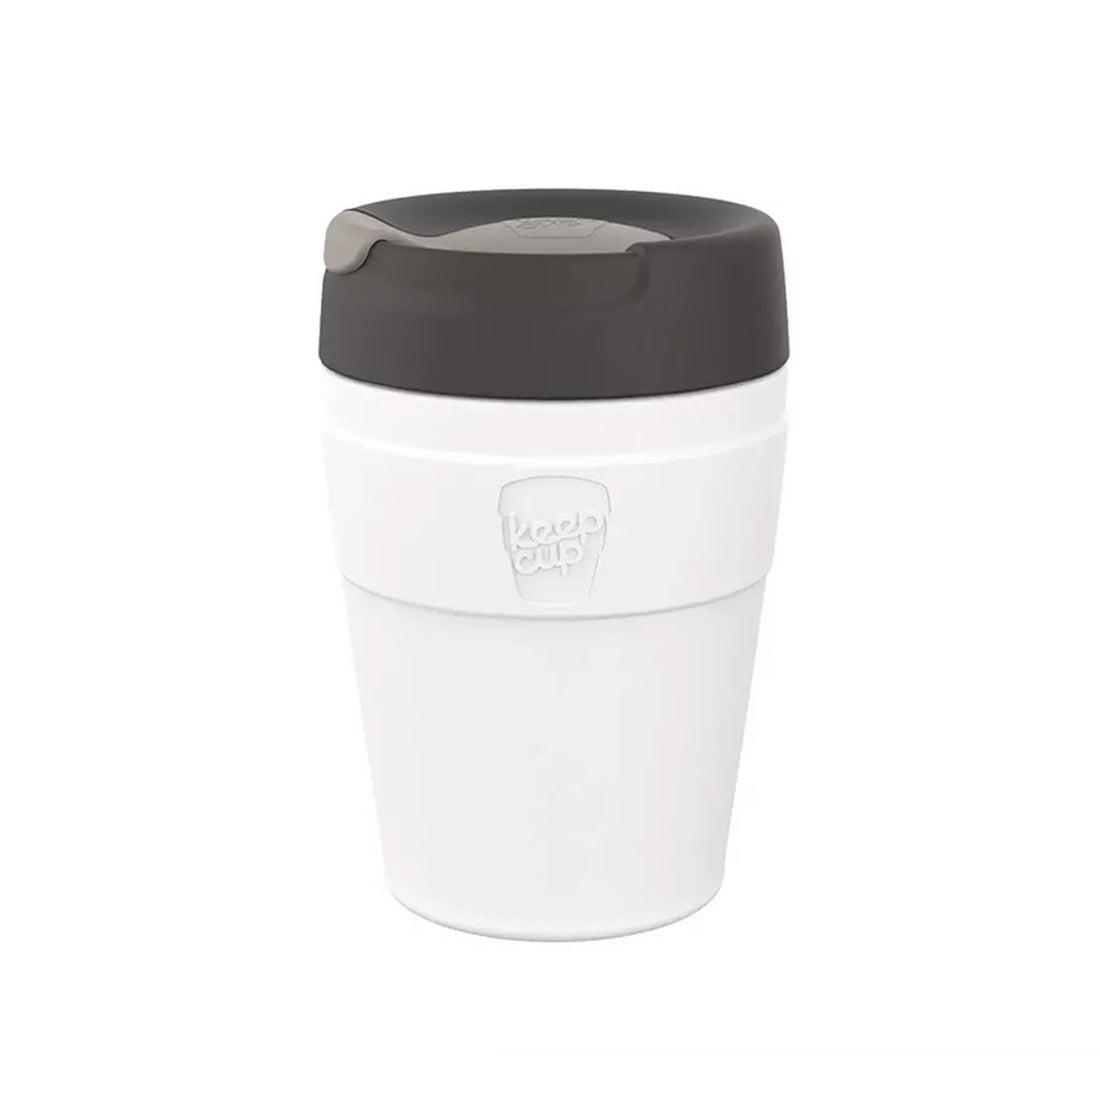 KeepCup Helix Traveller Stainless Steel Reusable Coffee Cup M 12oz - Qahwa